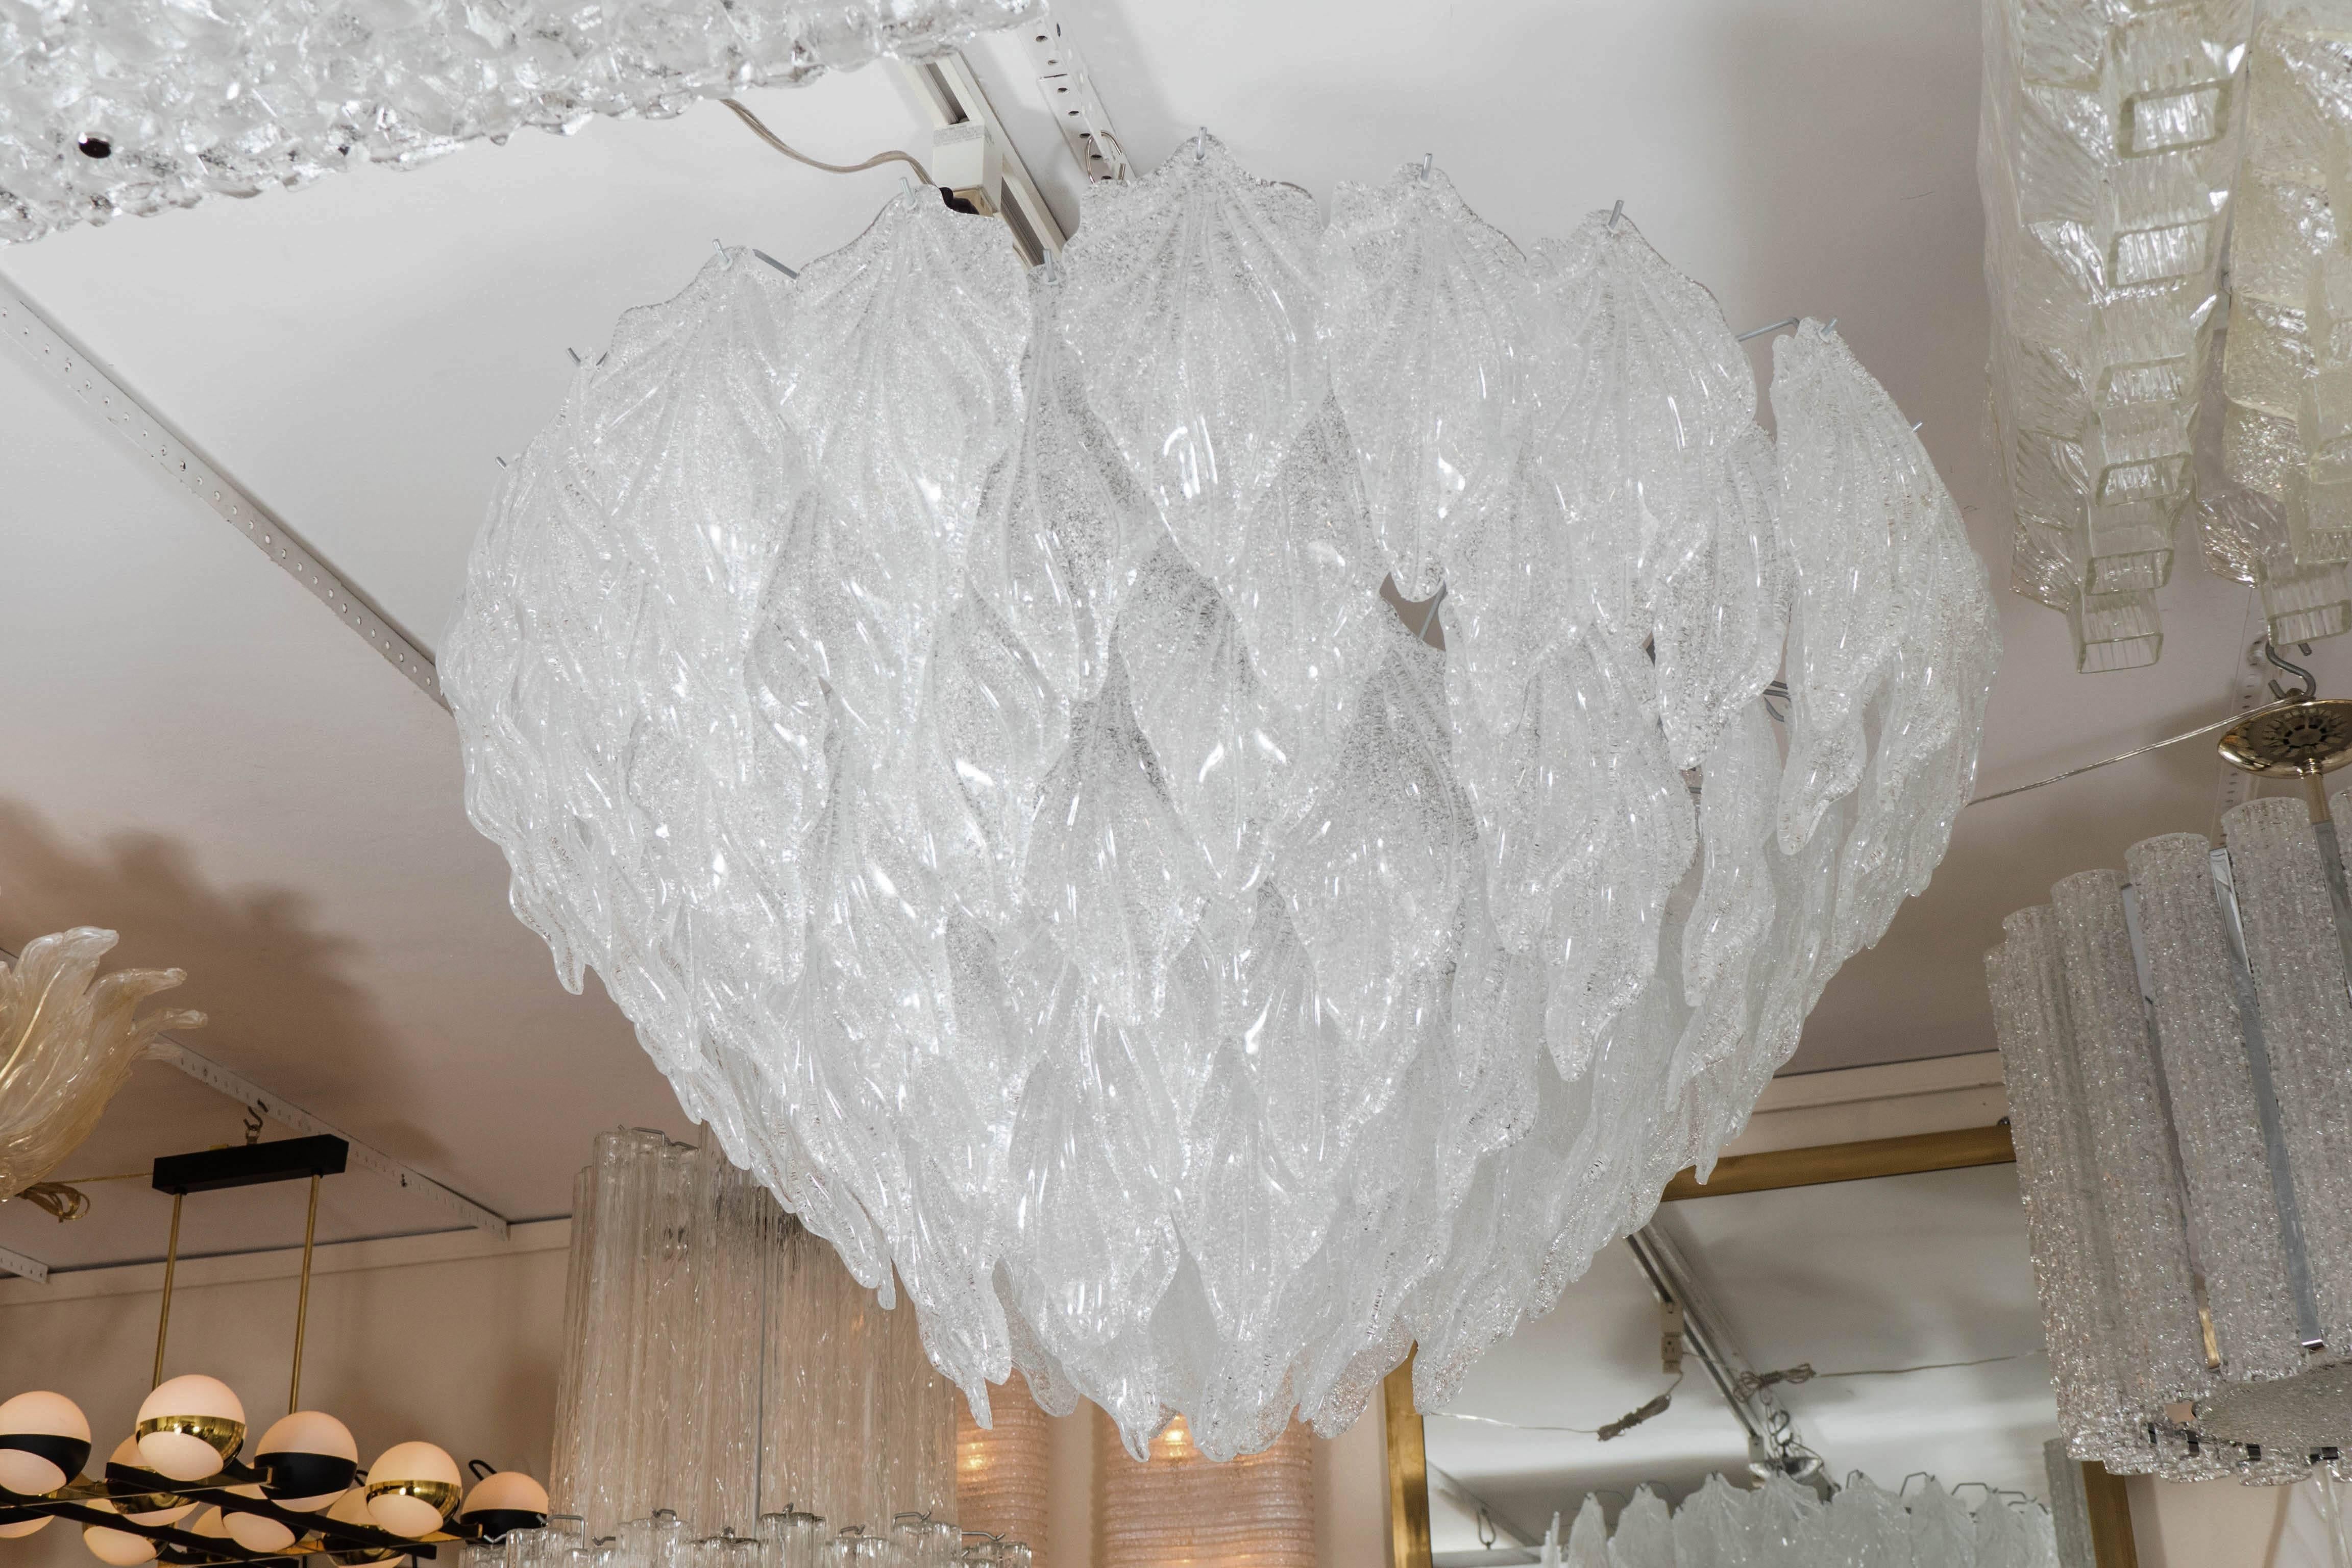 Multiered chandelier composed of textured Murano glass foliate form elements.